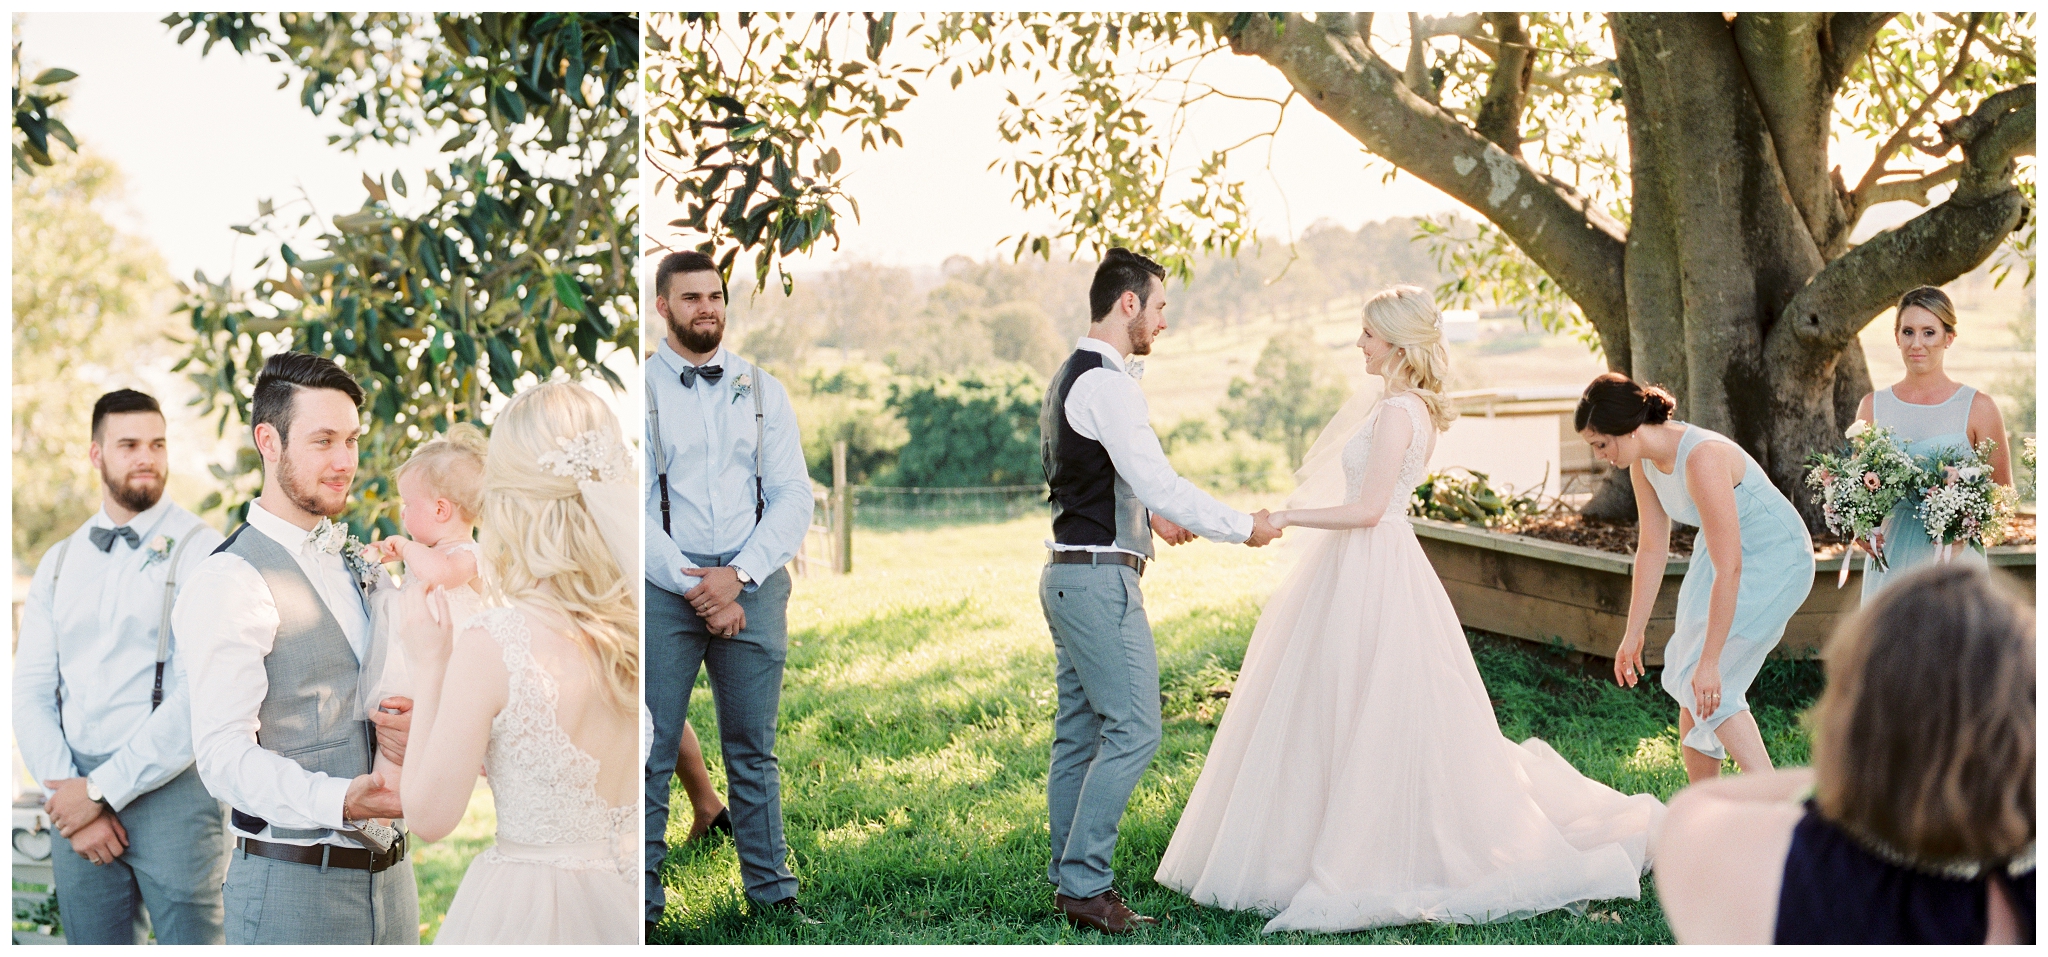 Tegan and Alex Wedding at Albert River Wines by Casey Jane Photography 32